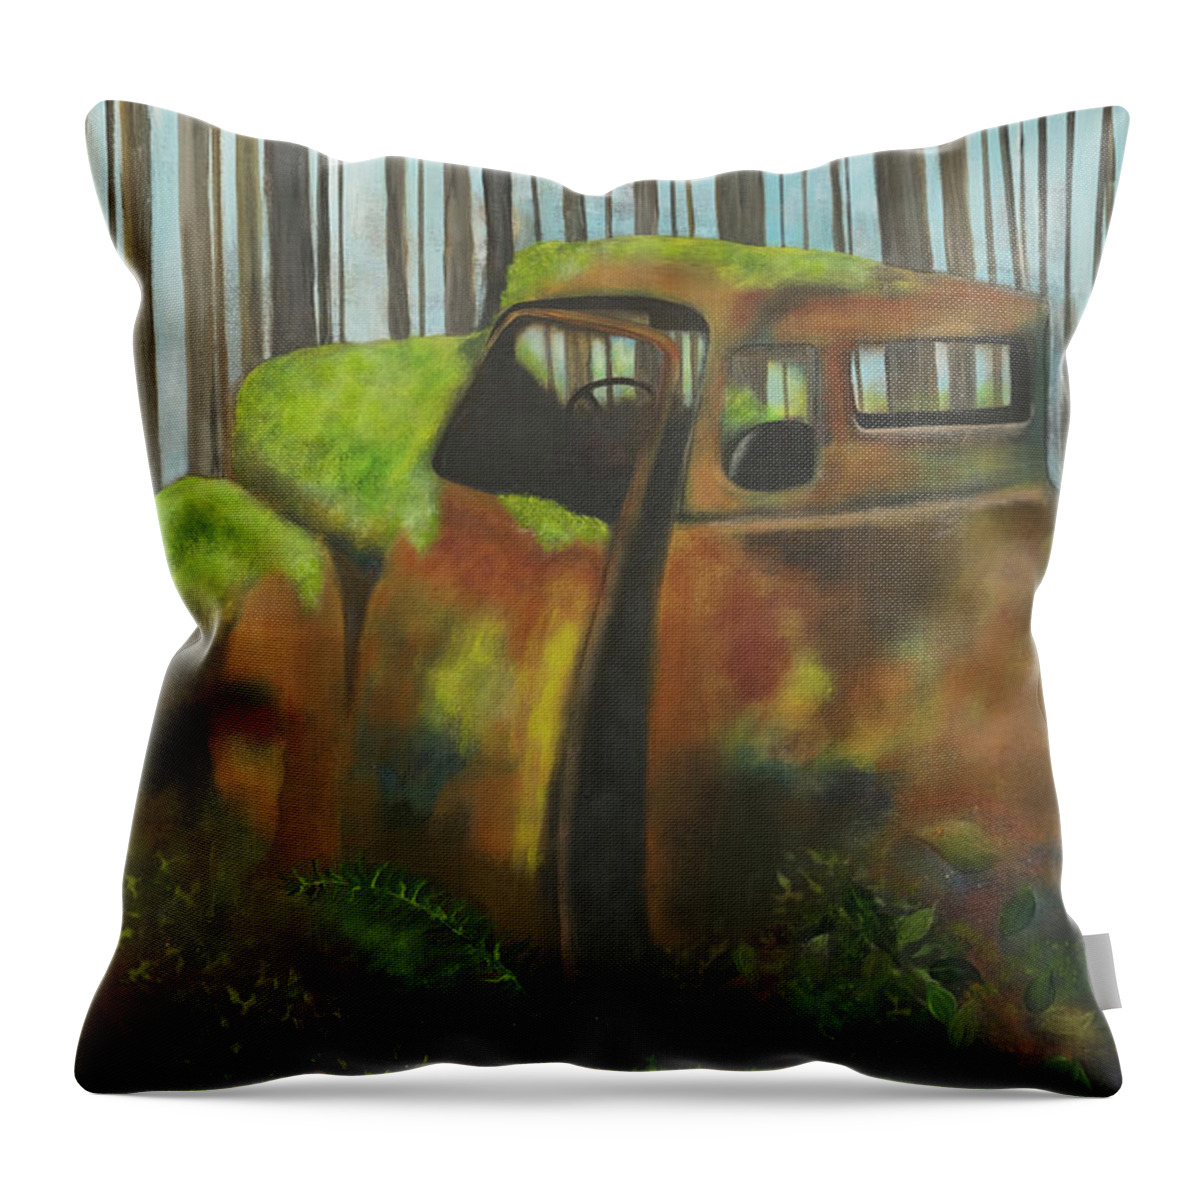 Vintage Throw Pillow featuring the painting Old Jalopy by Deborha Kerr